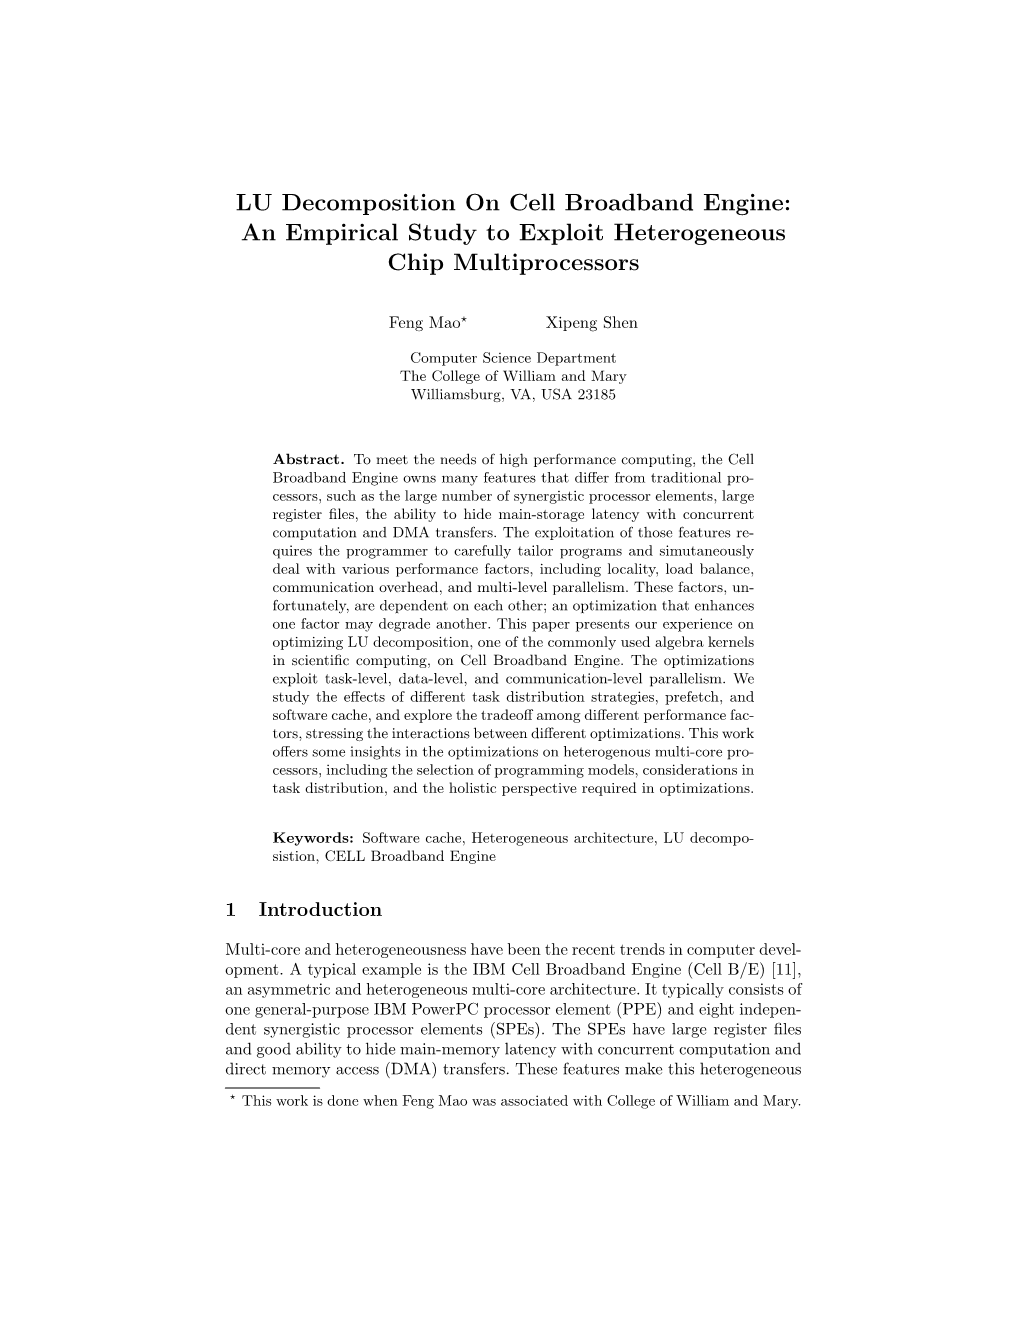 LU Decomposition on Cell Broadband Engine: an Empirical Study to Exploit Heterogeneous Chip Multiprocessors